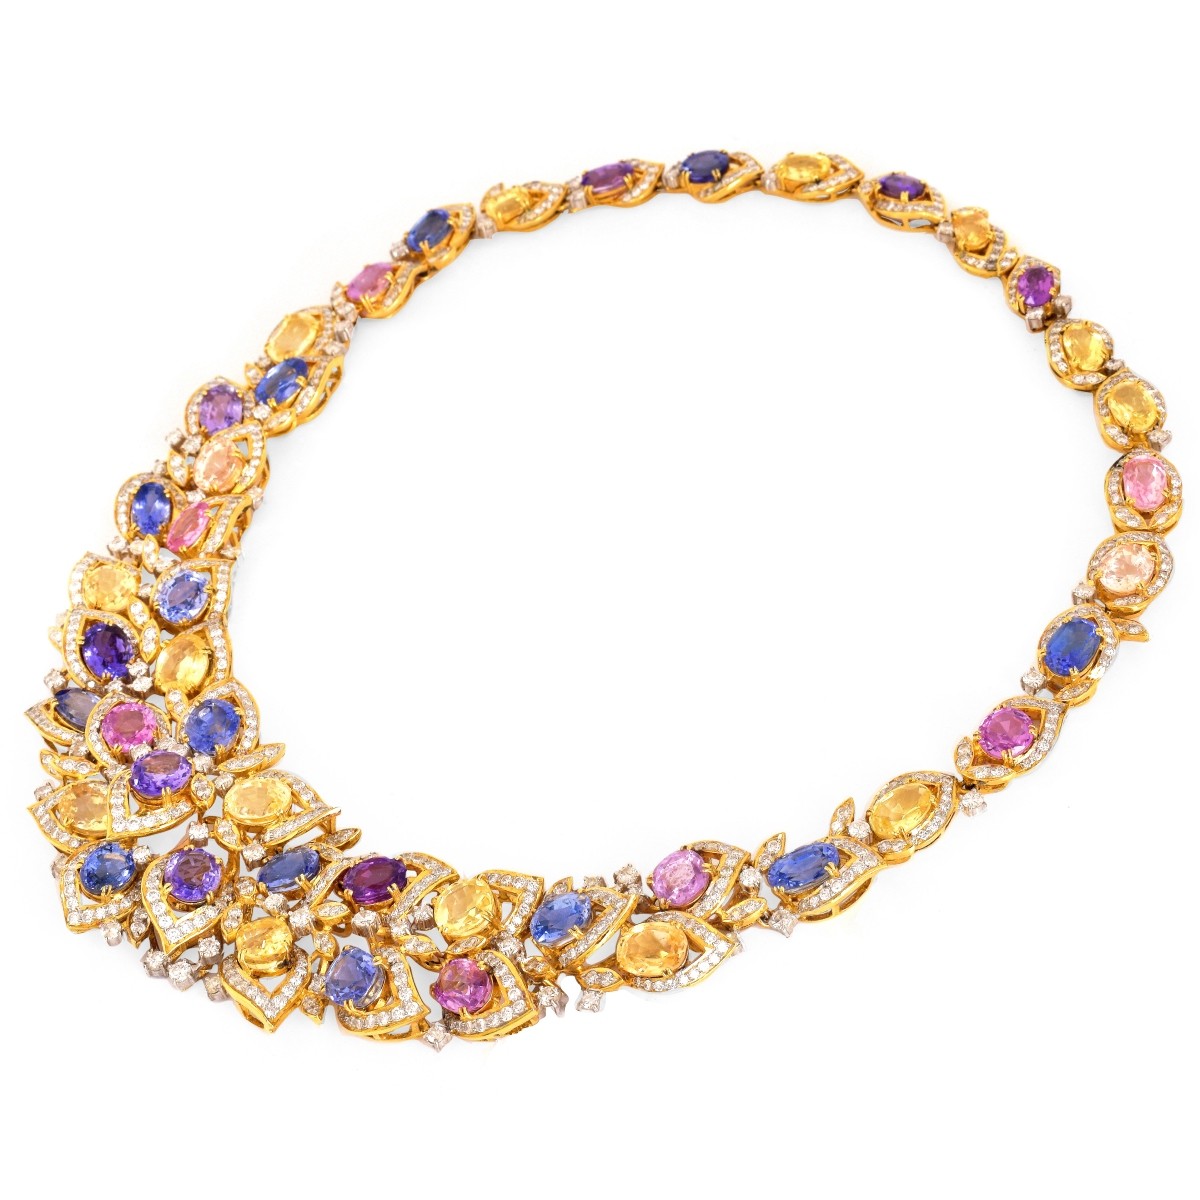 91.66ct TW Sapphire, Diamond and 18K Necklace | Kodner Auctions